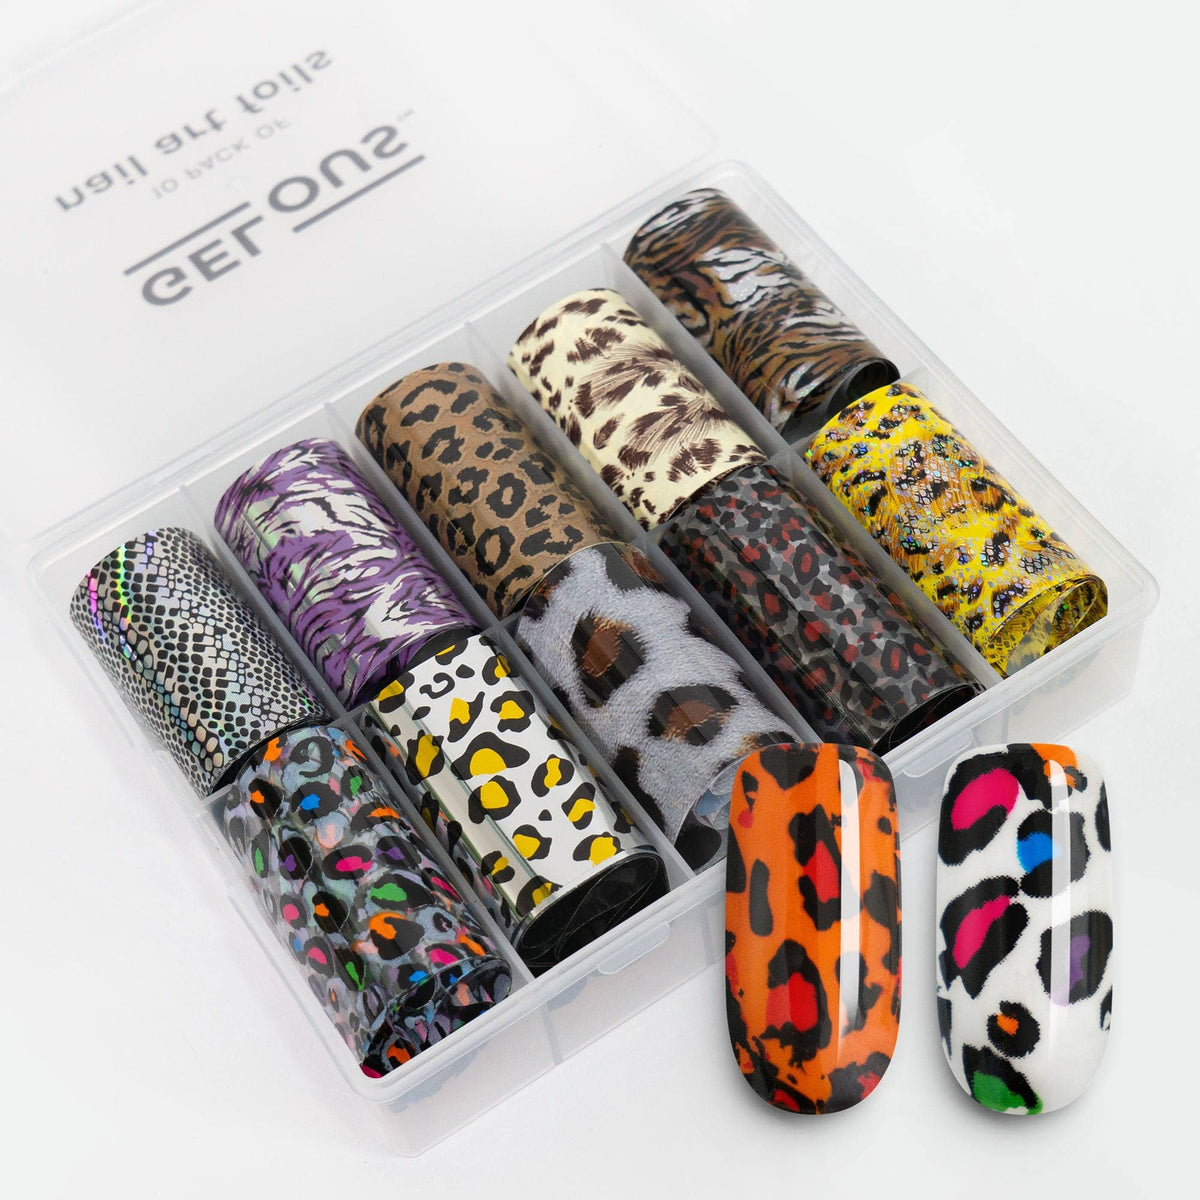 Gelous Queen of the Jungle Nail Art Foils product photo - photographed in New Zealand